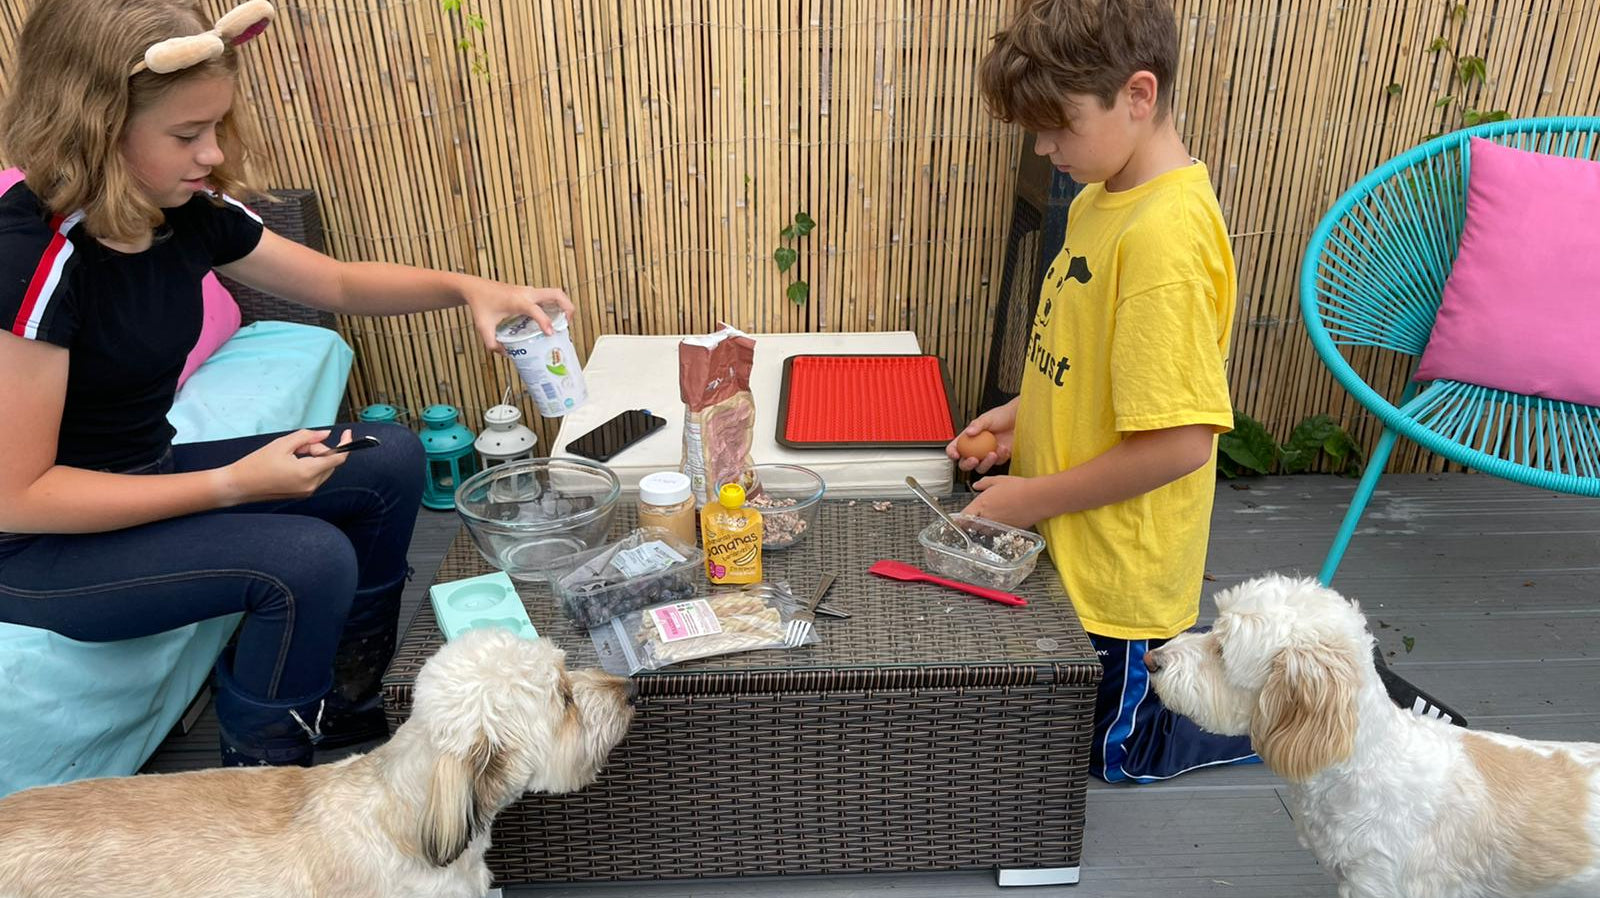 Fun outdoor activities for your kids and dog this summer – that don't cost a fortune